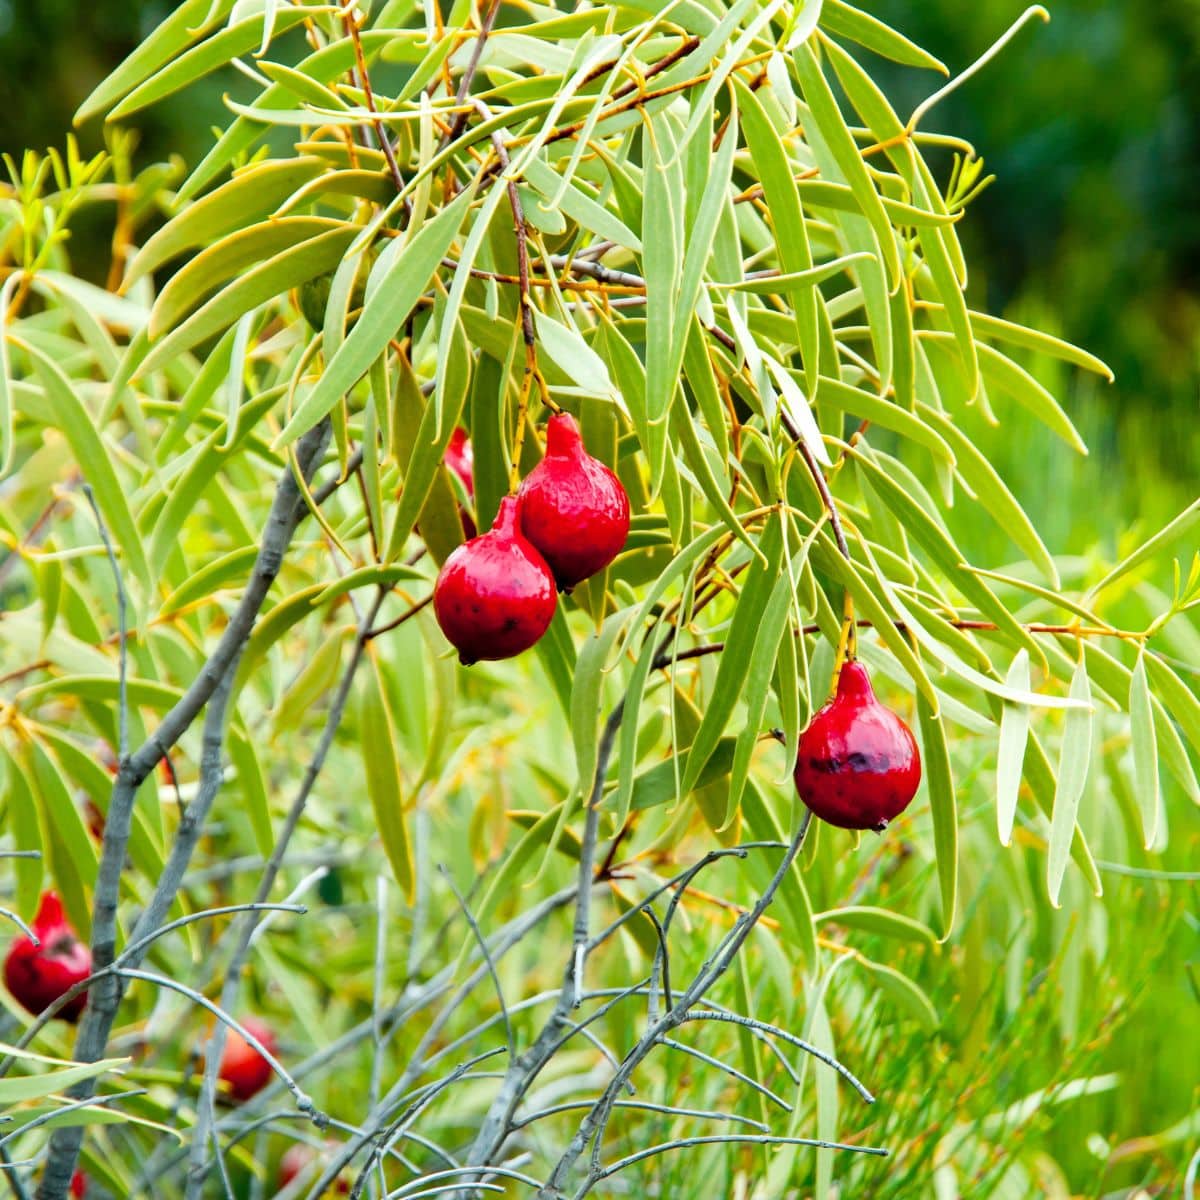 Quandong hanging on a tree.